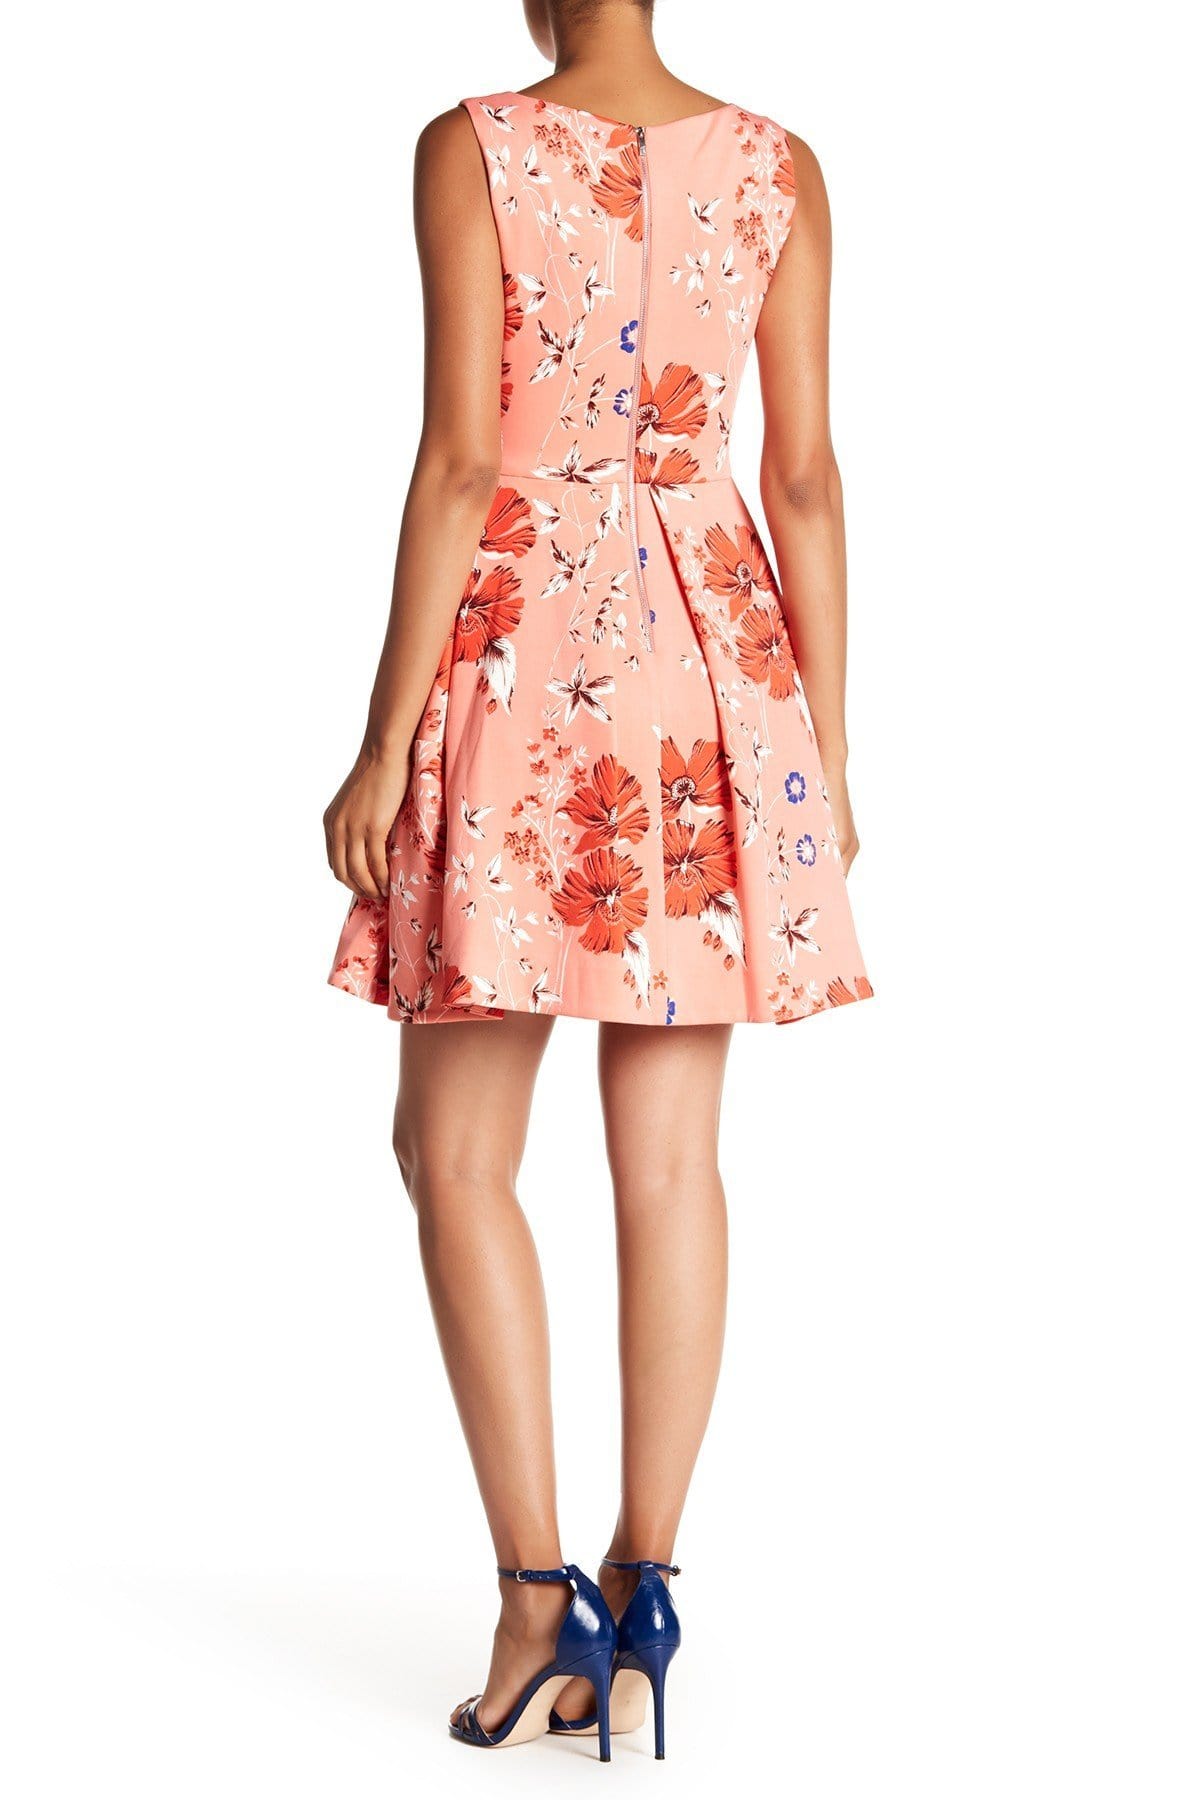 Taylor - 9757MJ Floral Print Short A-Line Dress In Pink and Floral